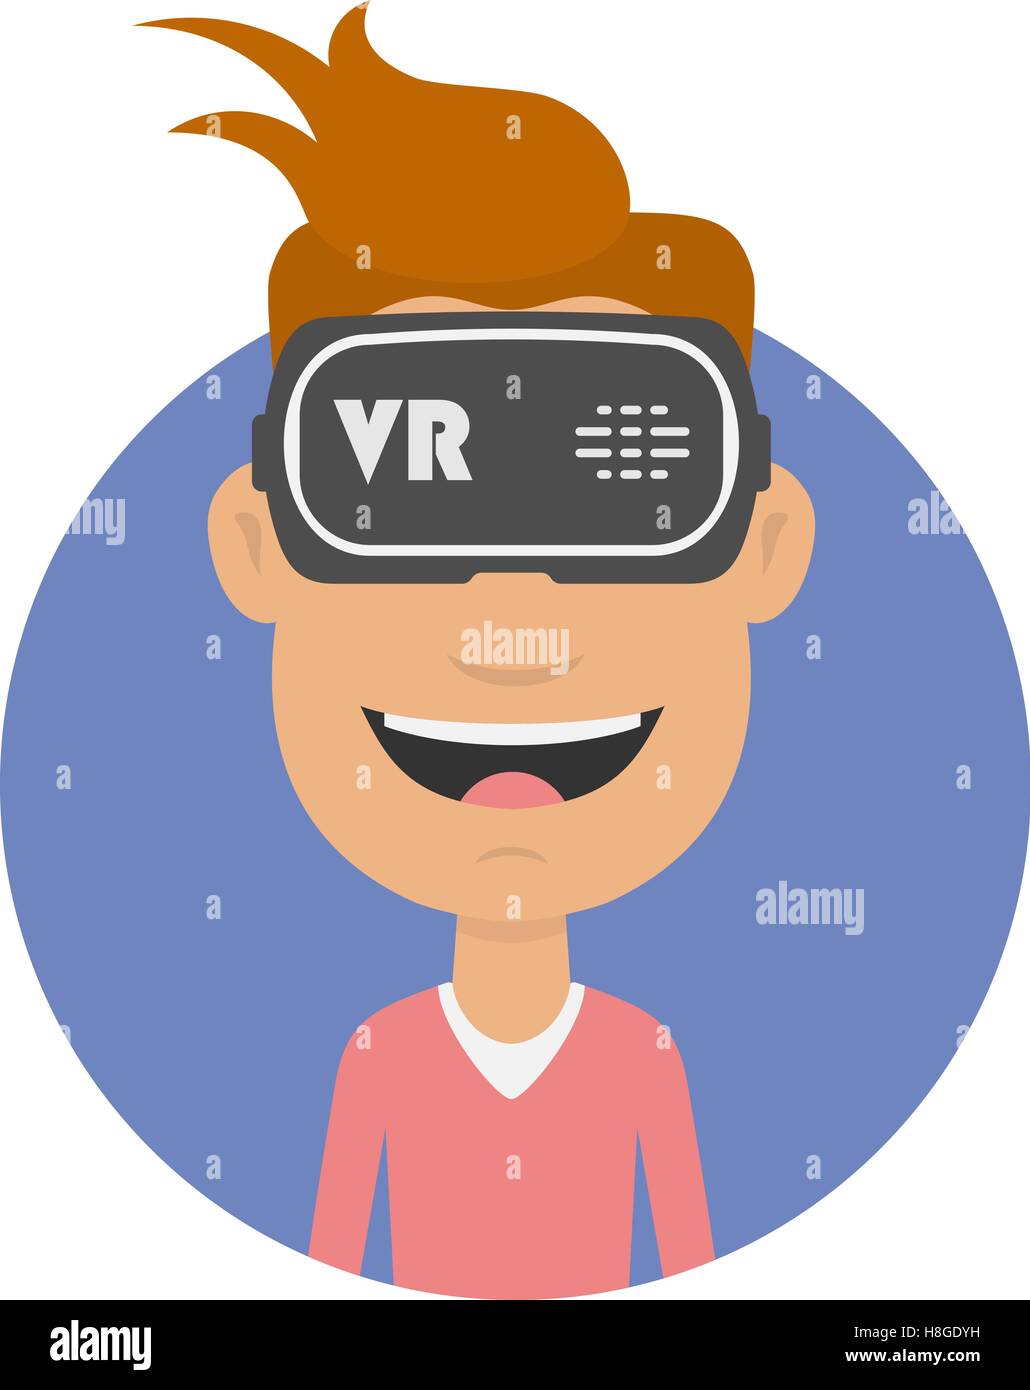 Joyful and happy man in virtual reality headset. Gaming Cyber Stock